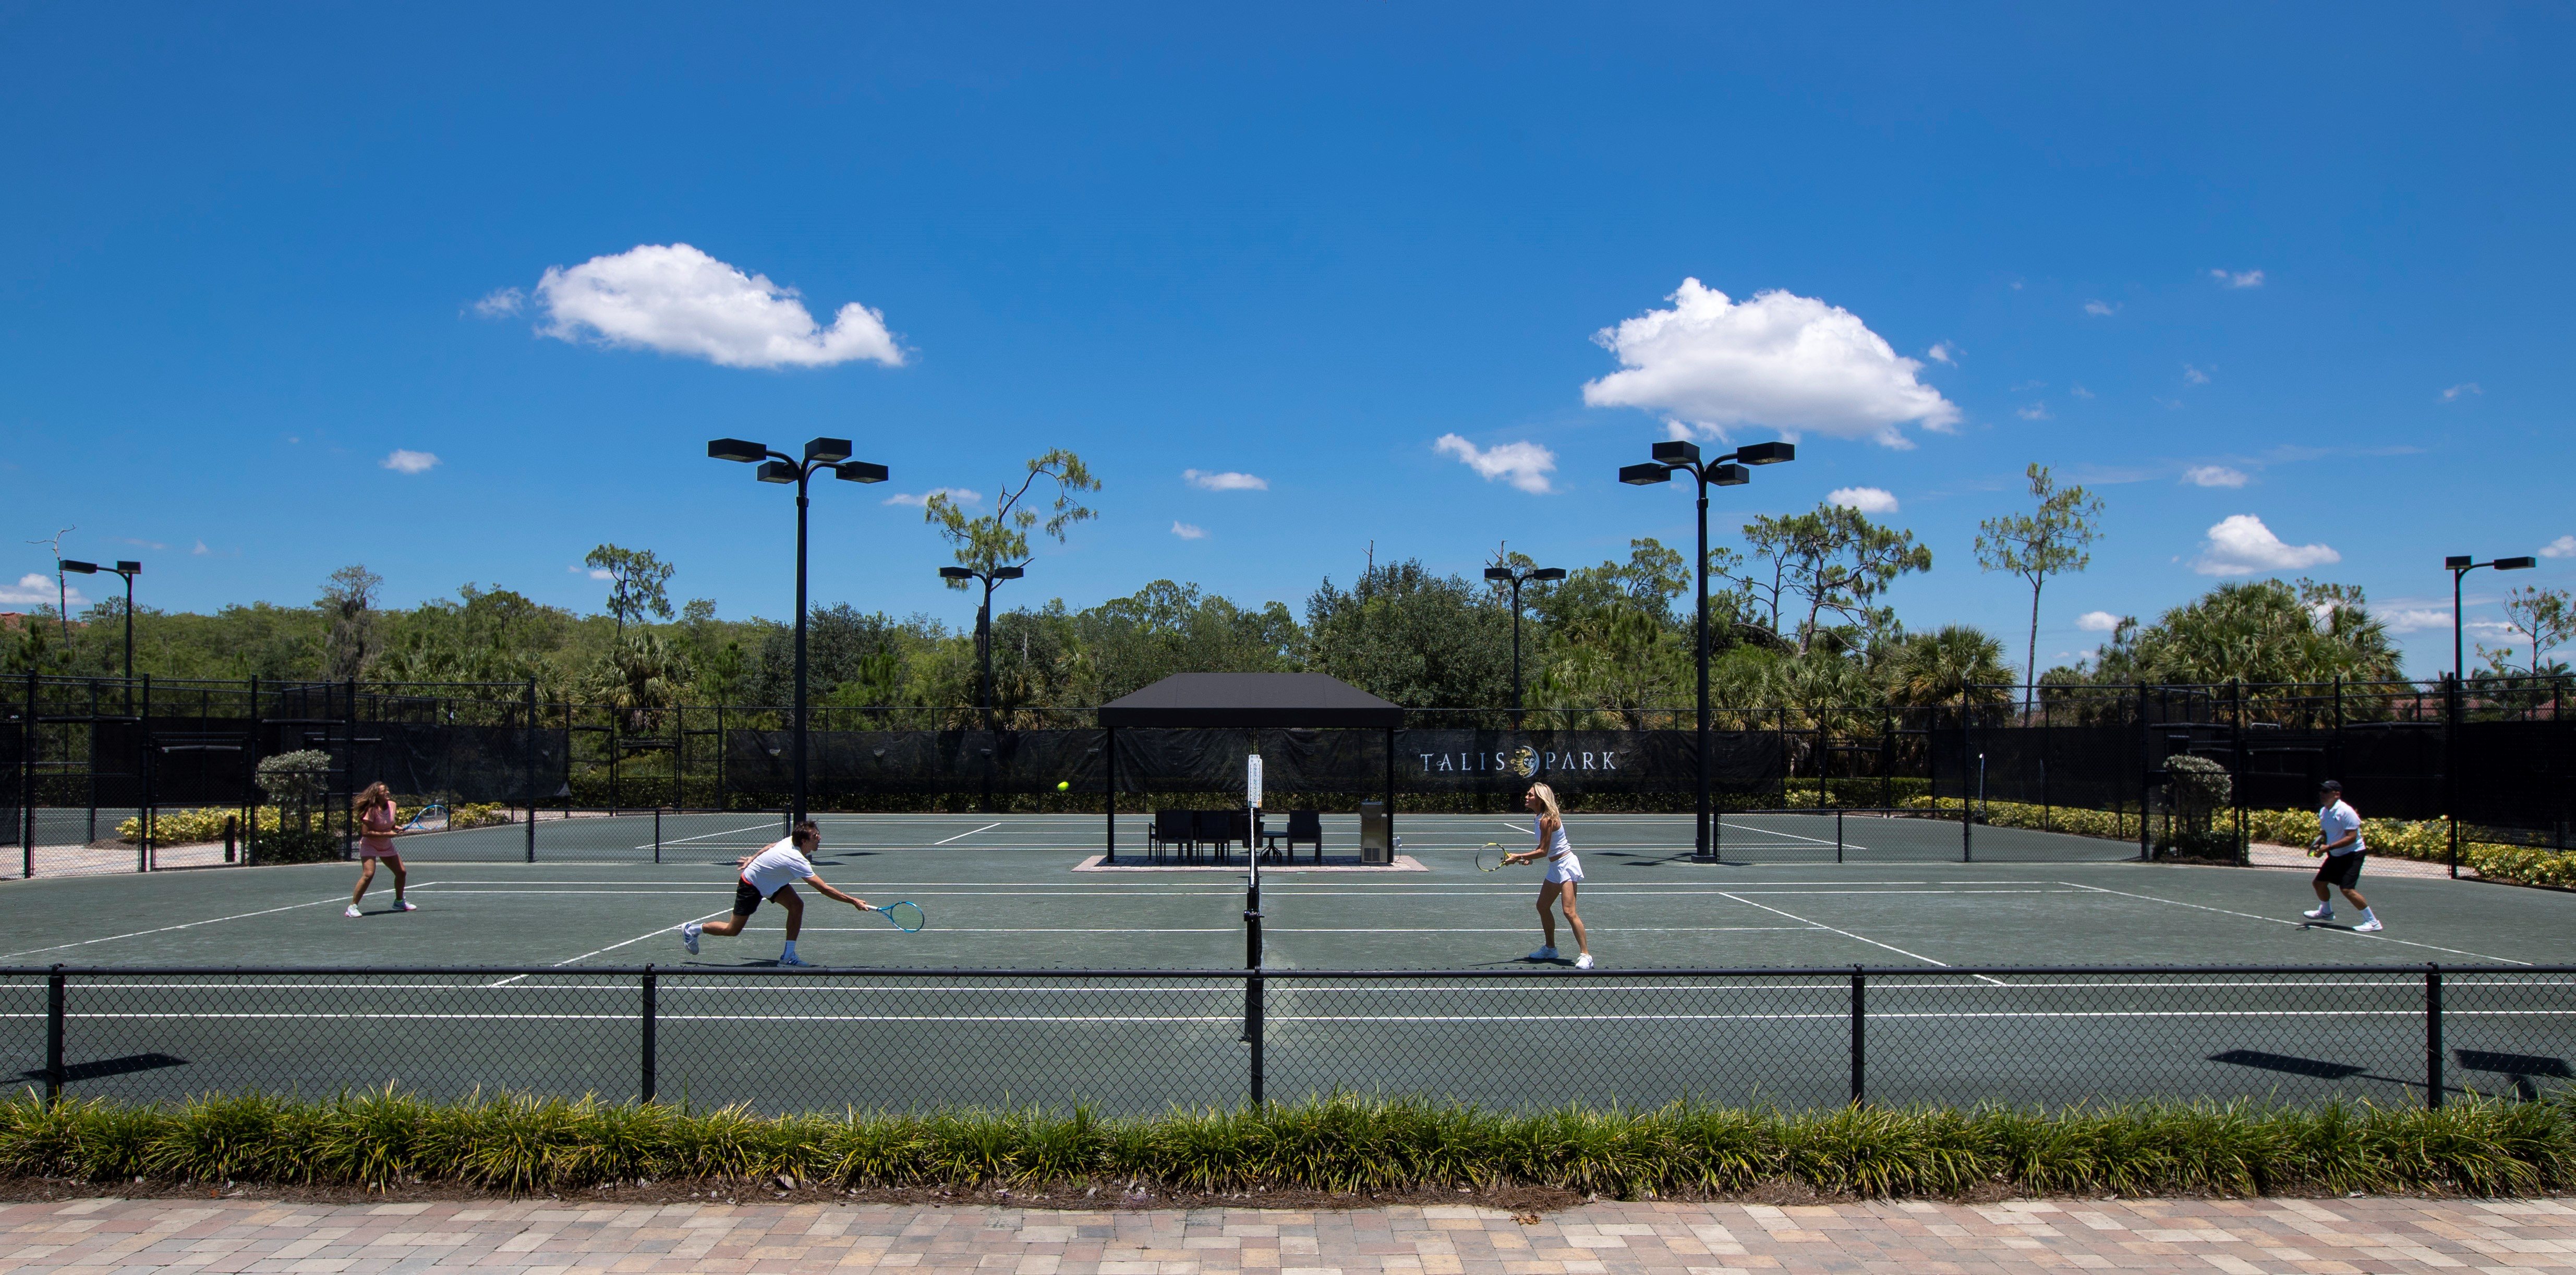 two couples playing tennis in a tennis court